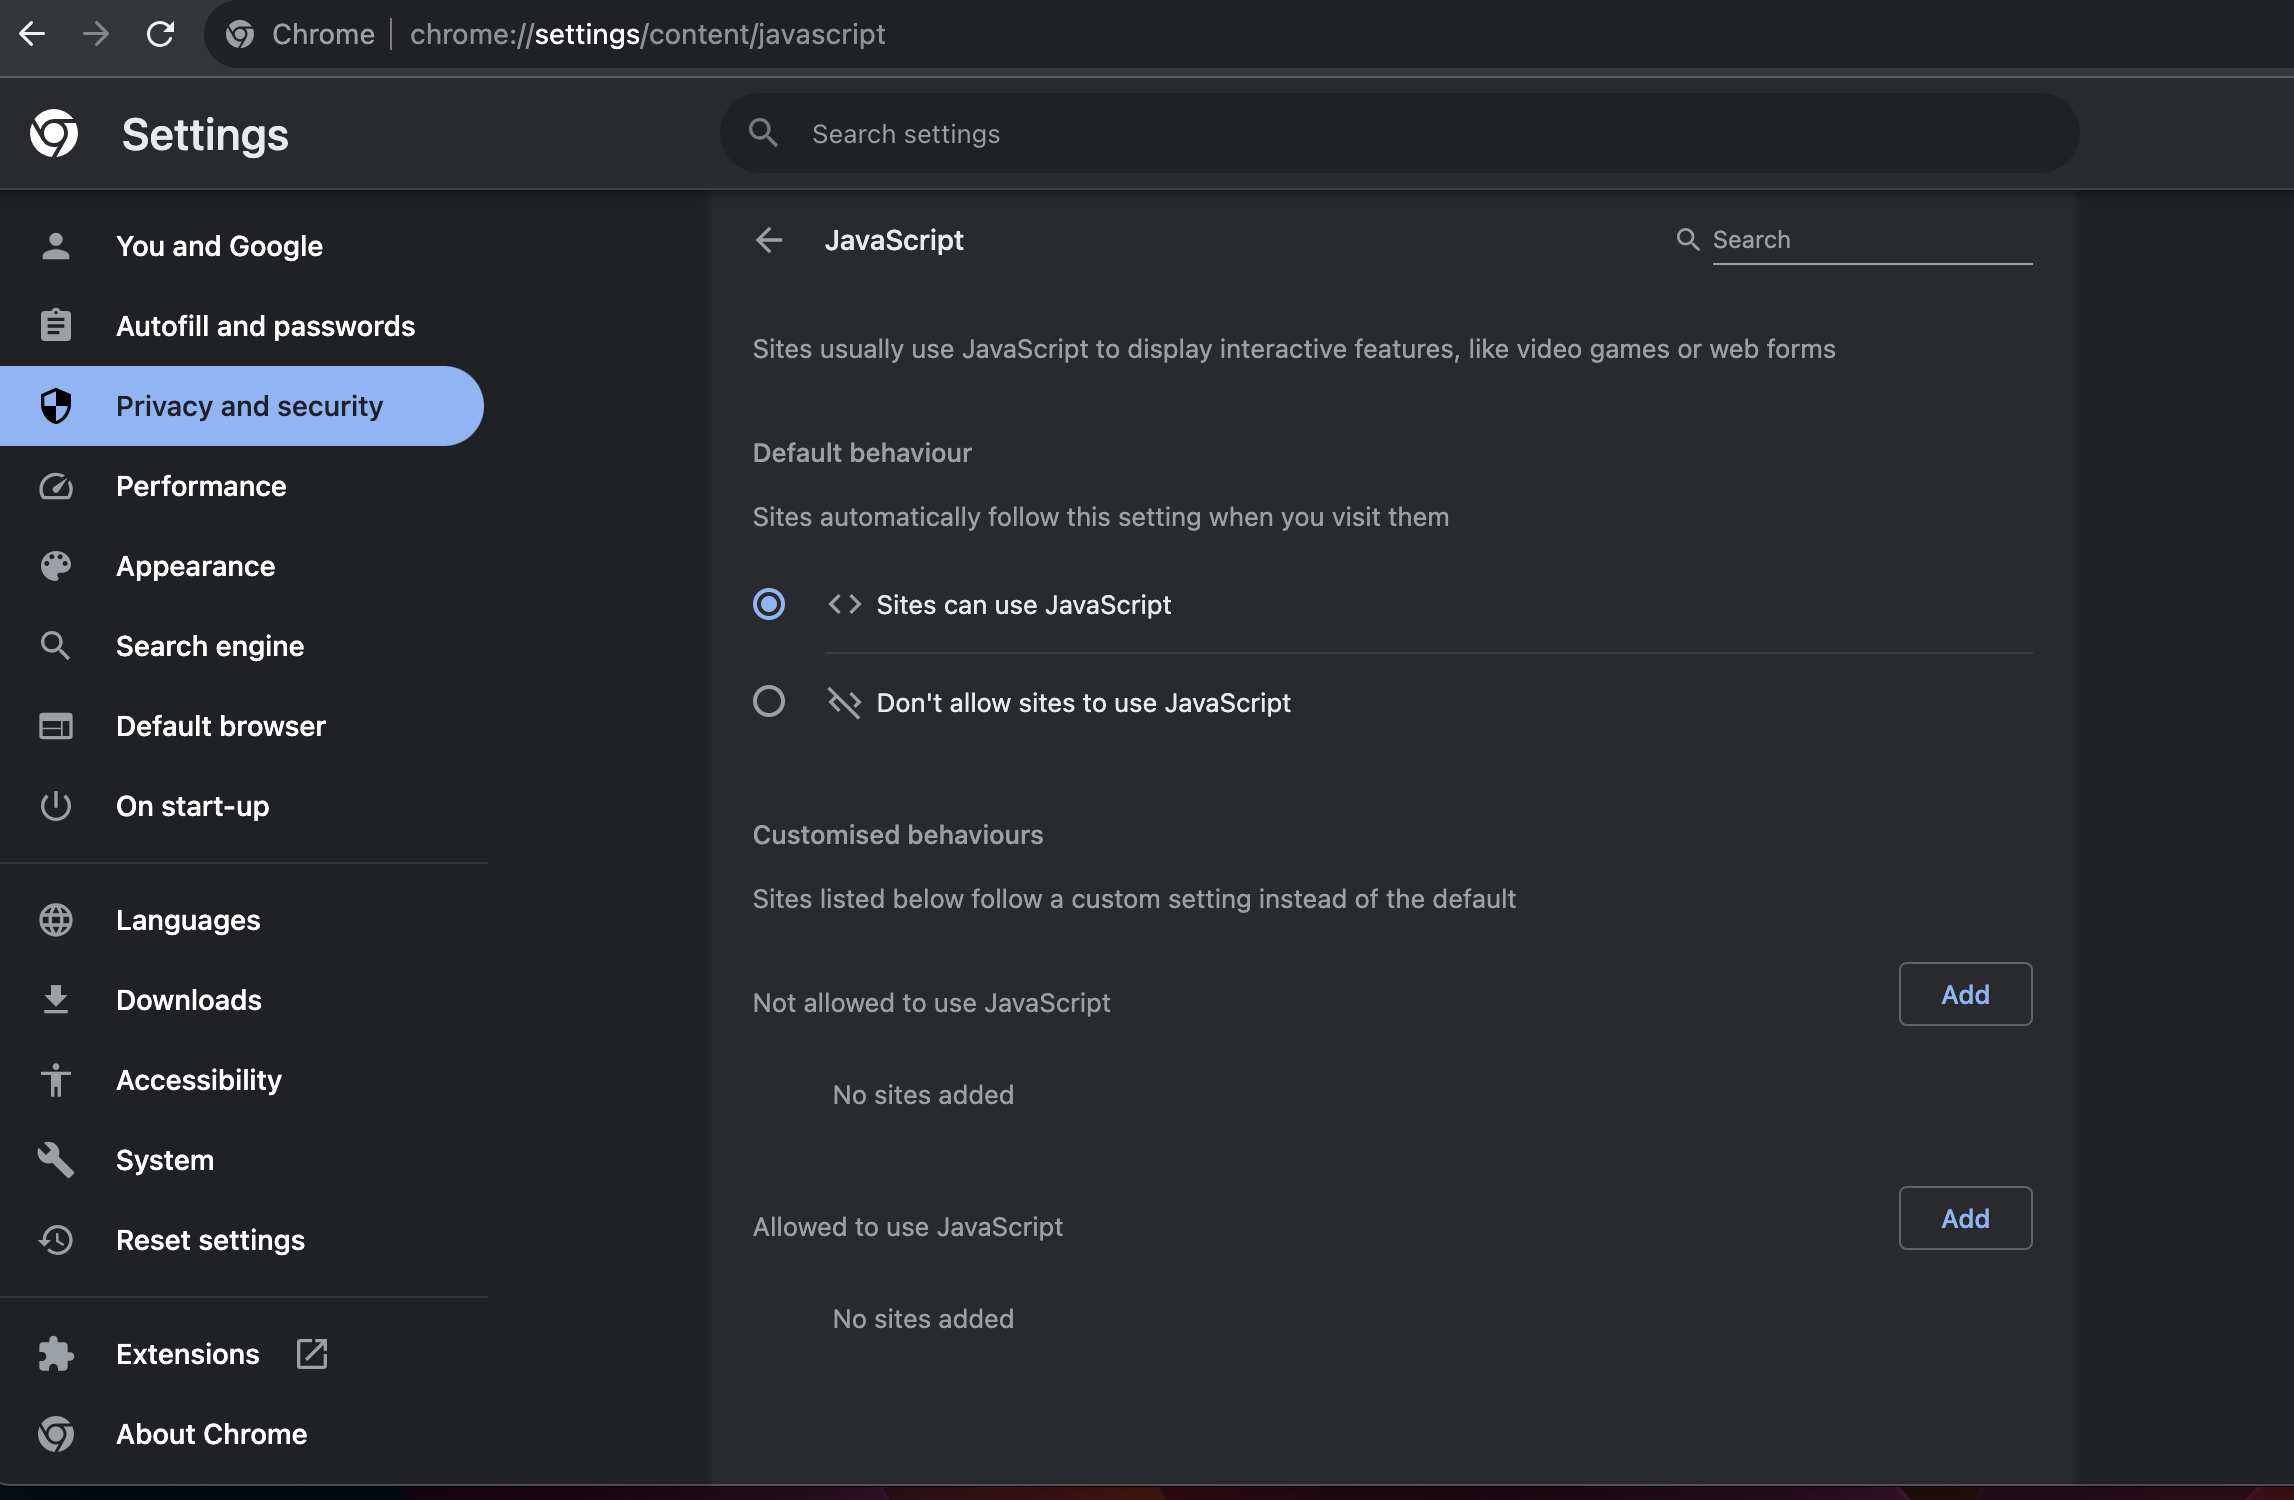 Screenshot of the privacy and security settings in Chrome